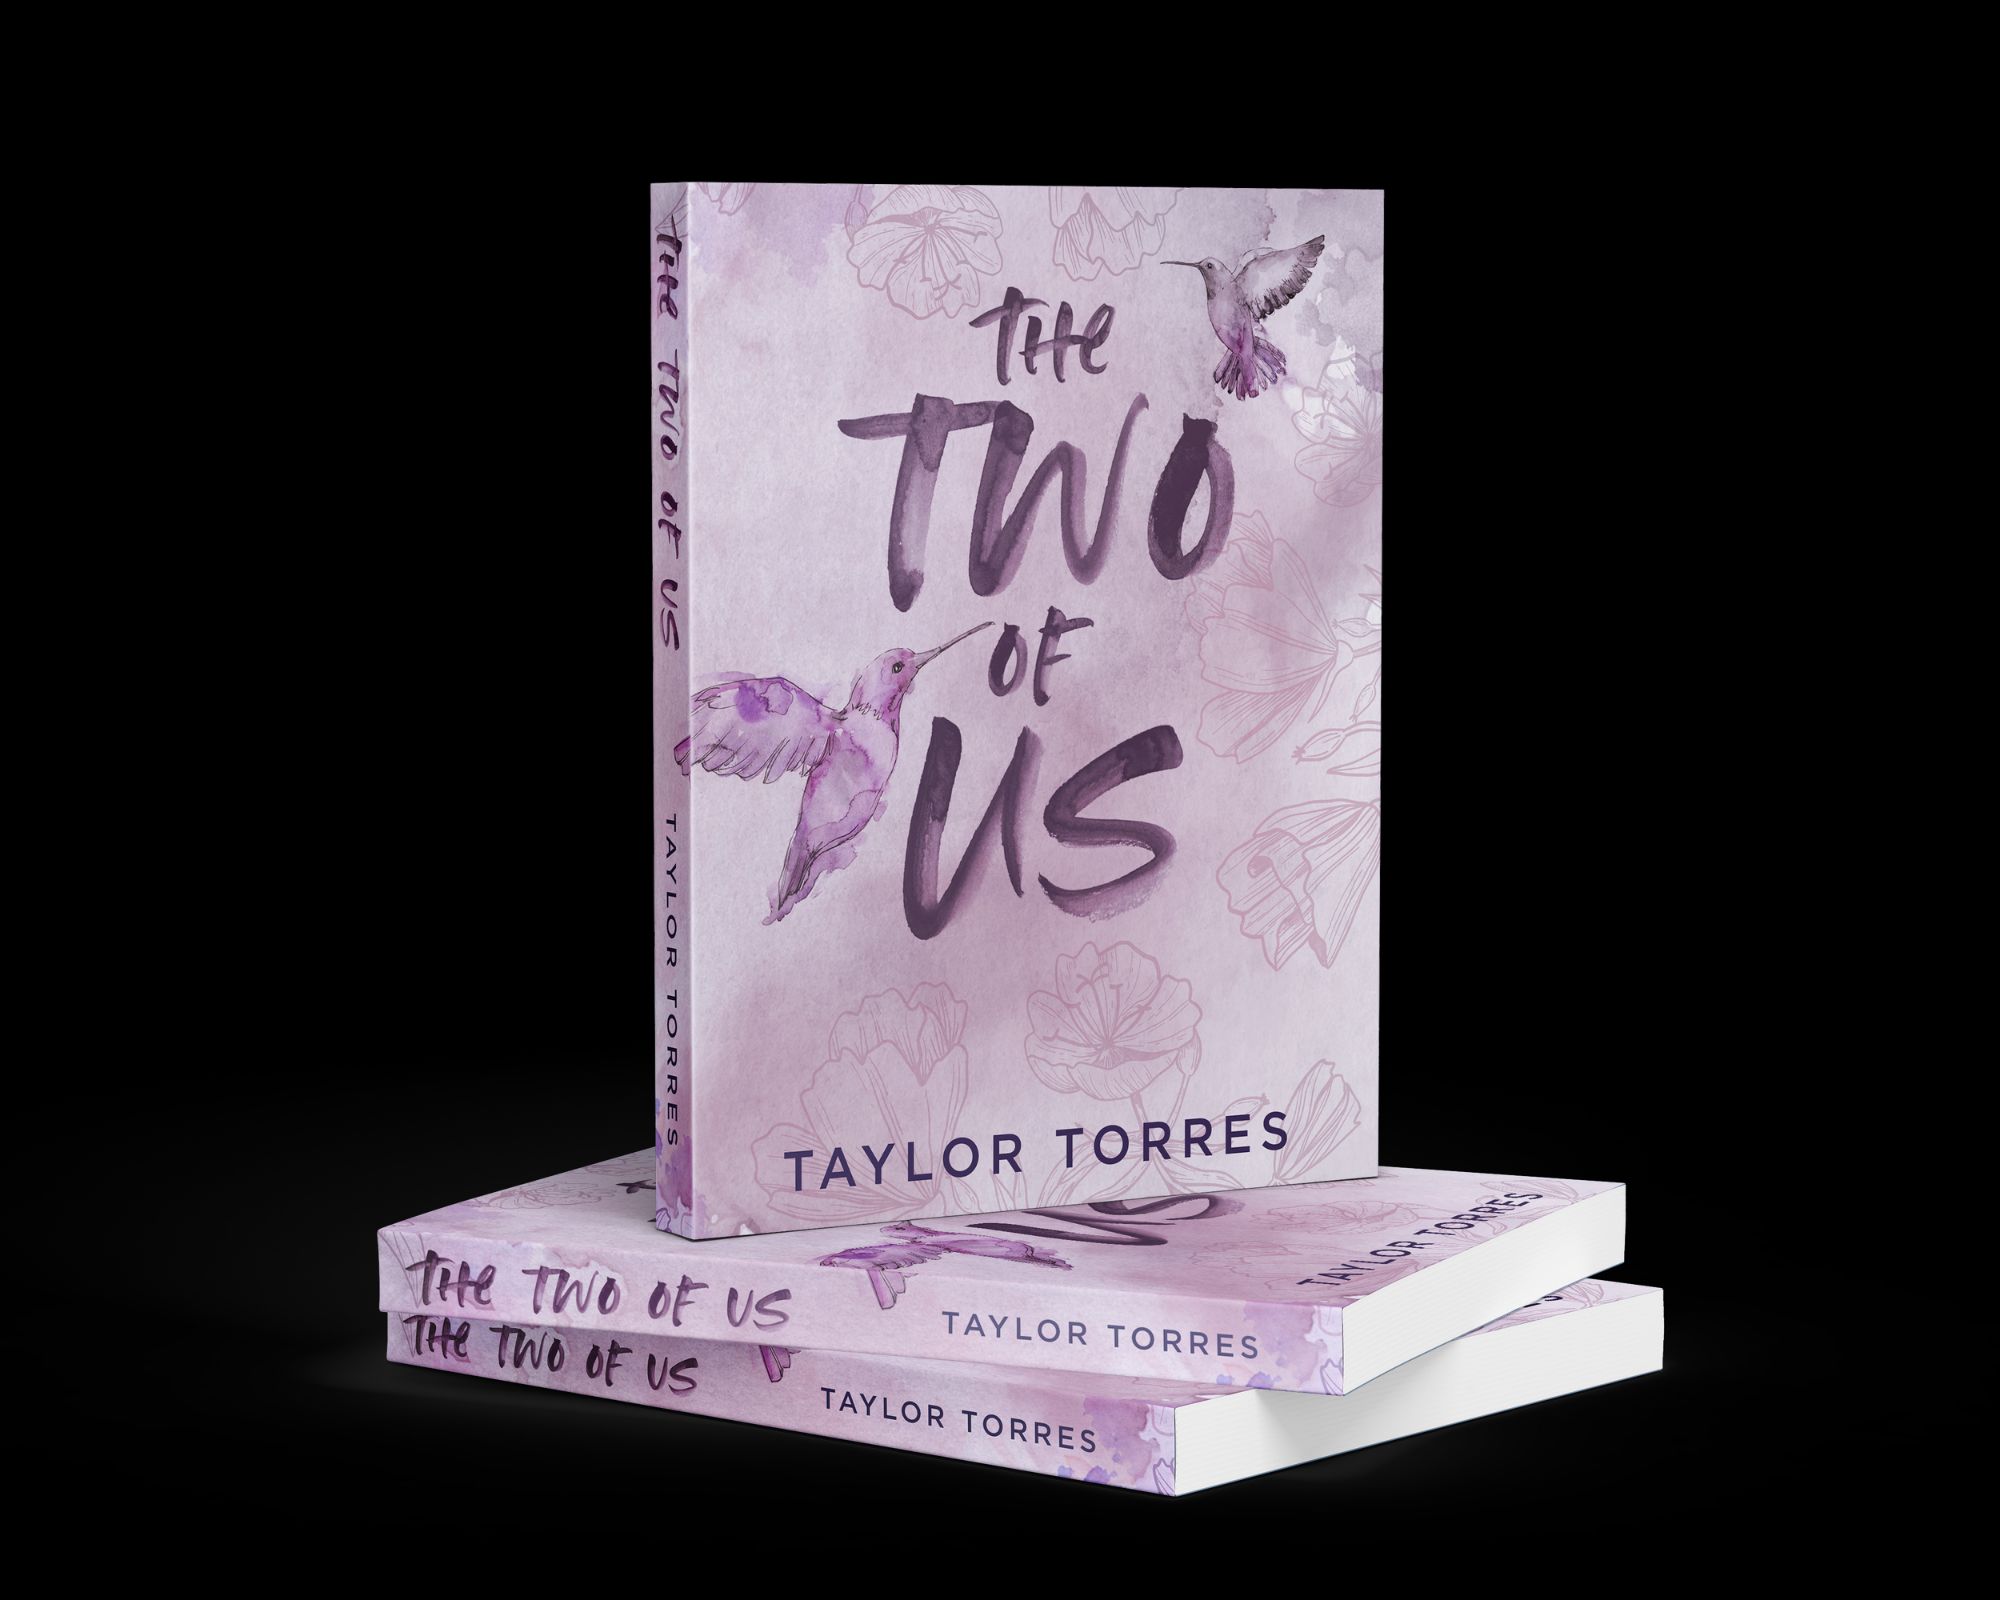 The Two of Us book by taylor torres